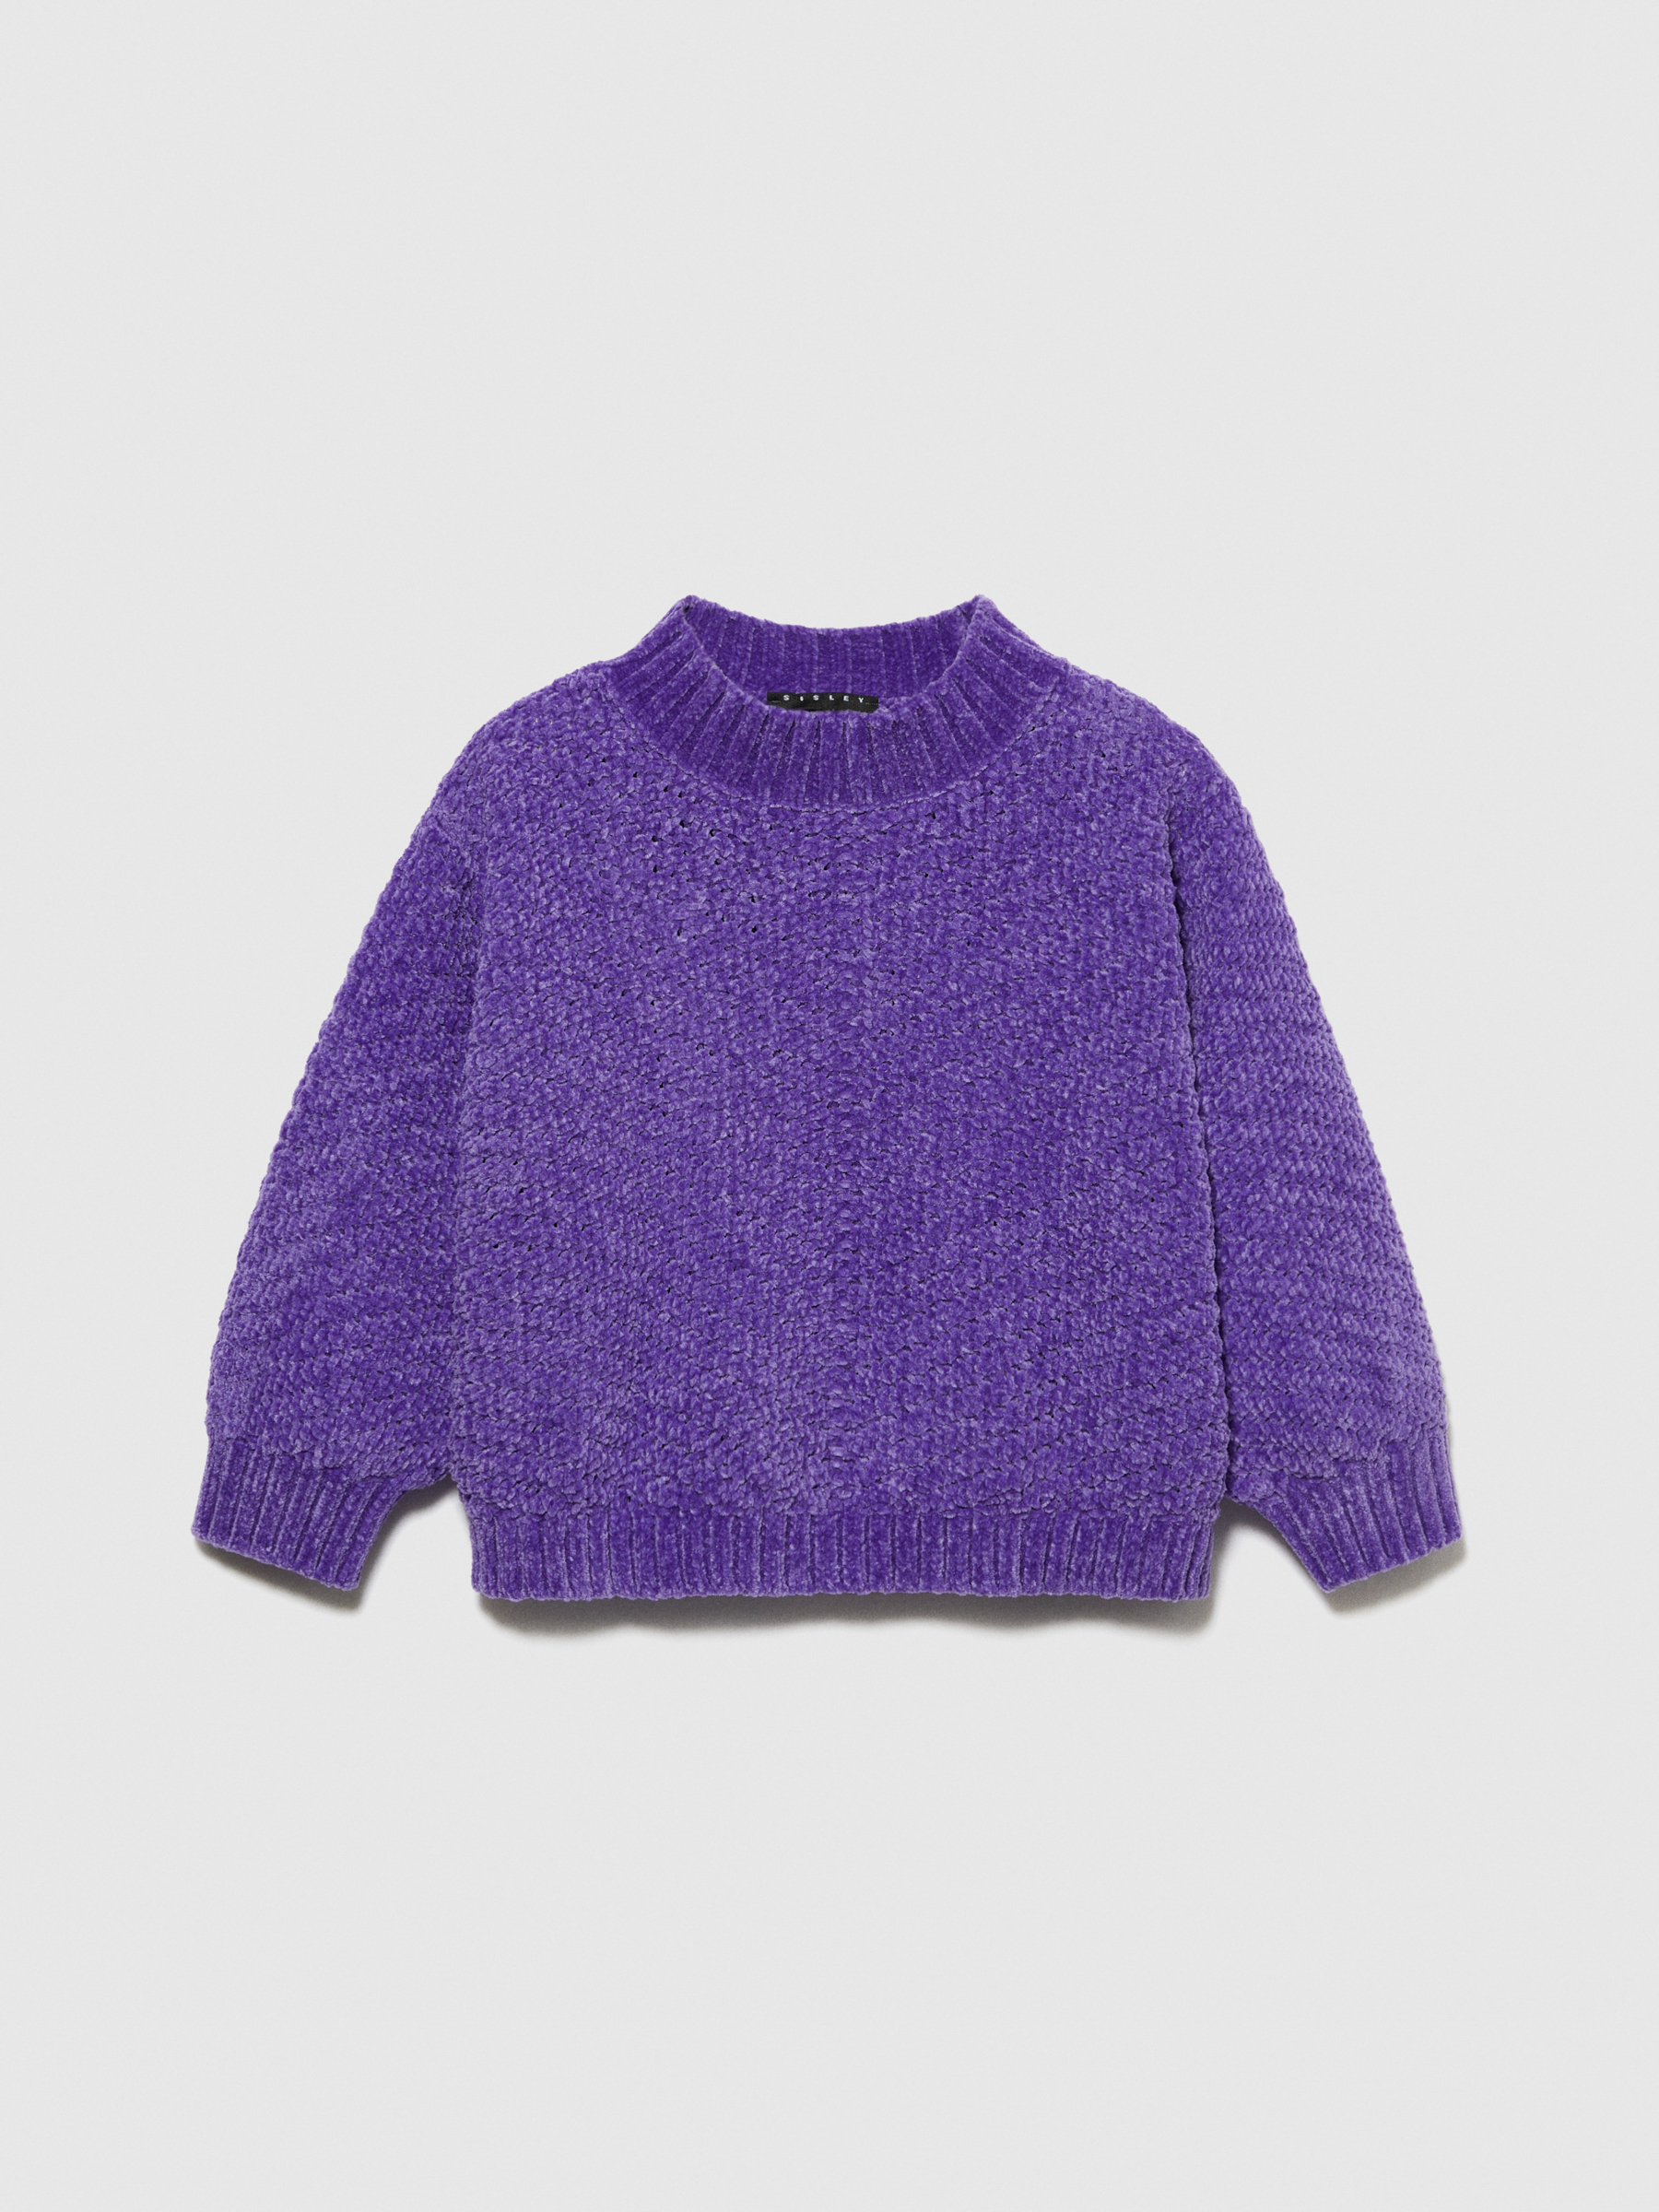 Sisley Young - Cropped Chenille Sweater, Woman, Violet, Size: KL